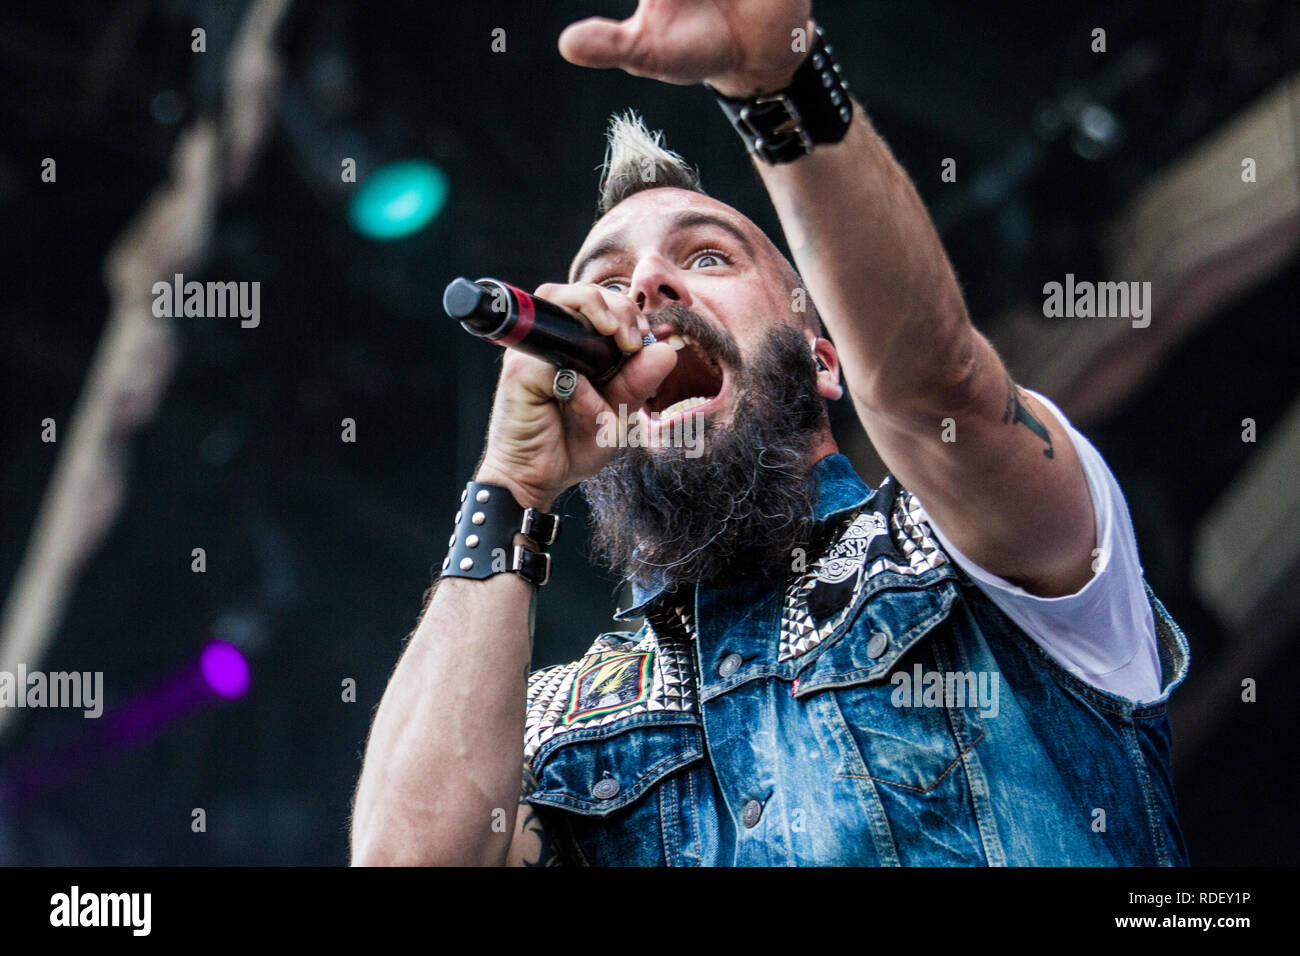 Austria, Nickelsdorf - June 17, 2018. The American metalcore band Killswitch Engage performs a live concert during the Austrian music festival Nova Rock Festival 2018. Here vocalist Jesse Leach is seen live on stage. (Photo credit: Gonzales Photo - Synne Nilsson). Stock Photo